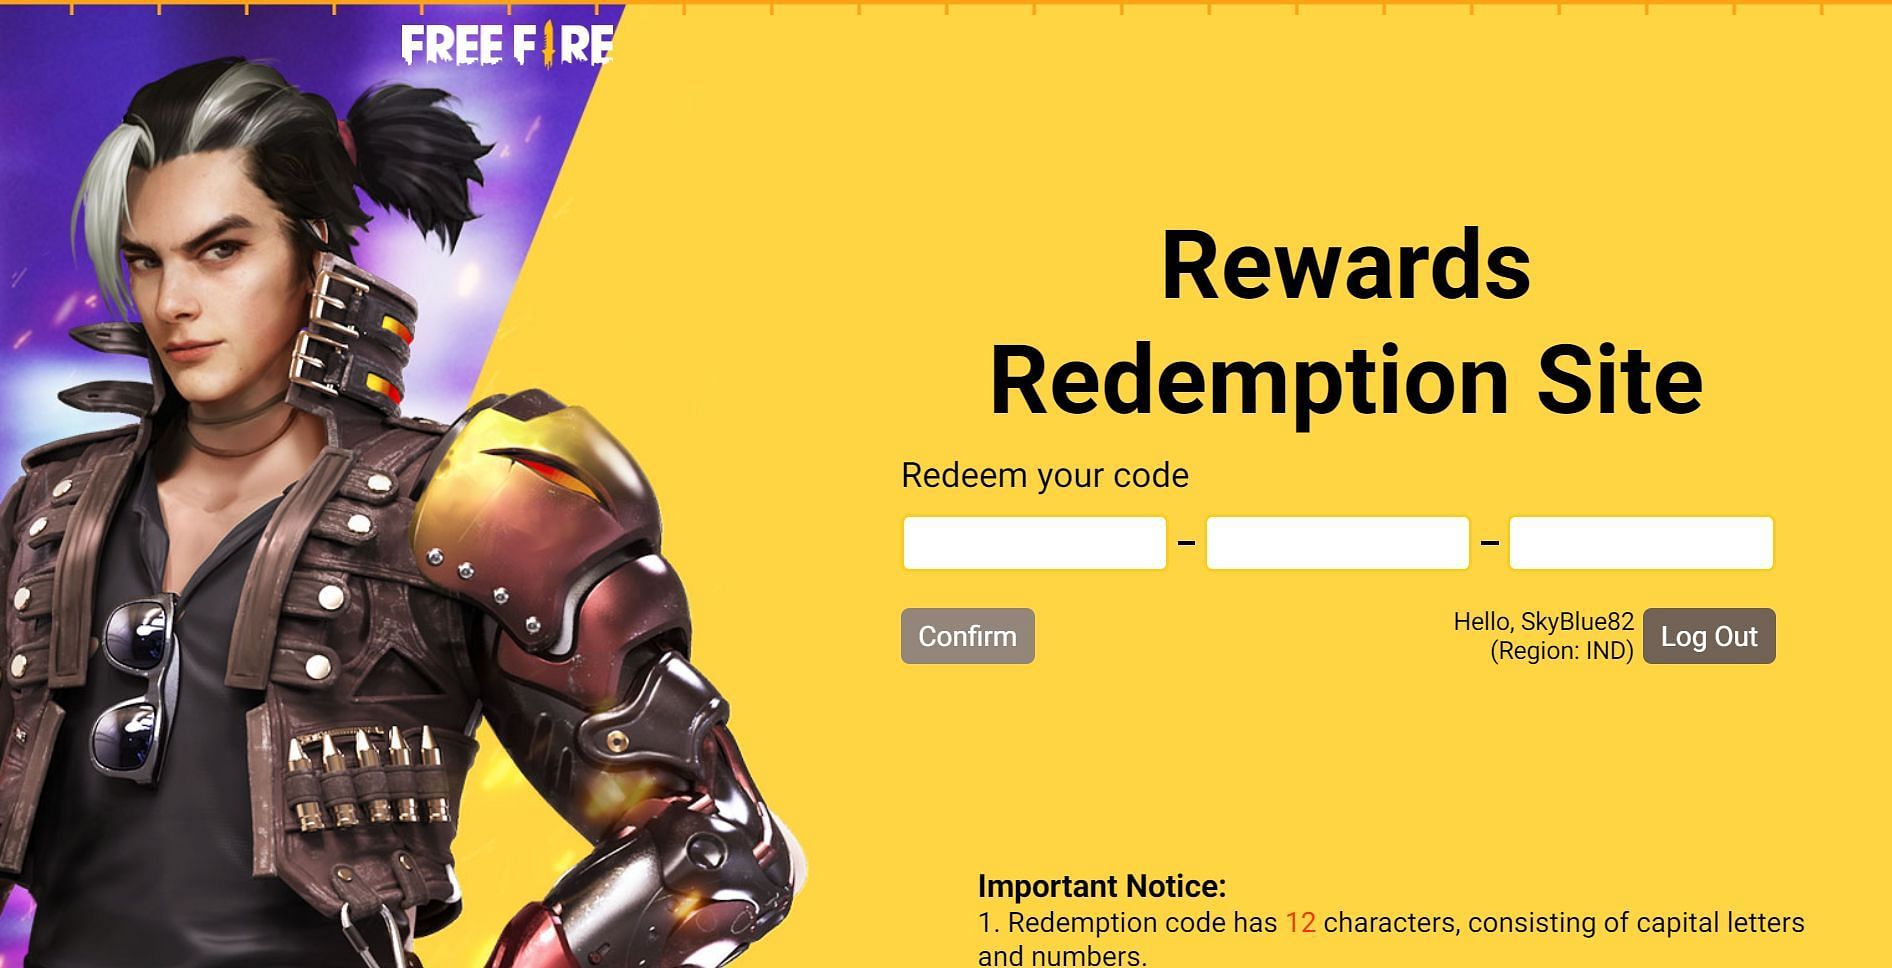 As the next step, the redeem code needs to be entered by the players (Image via Free Fire)